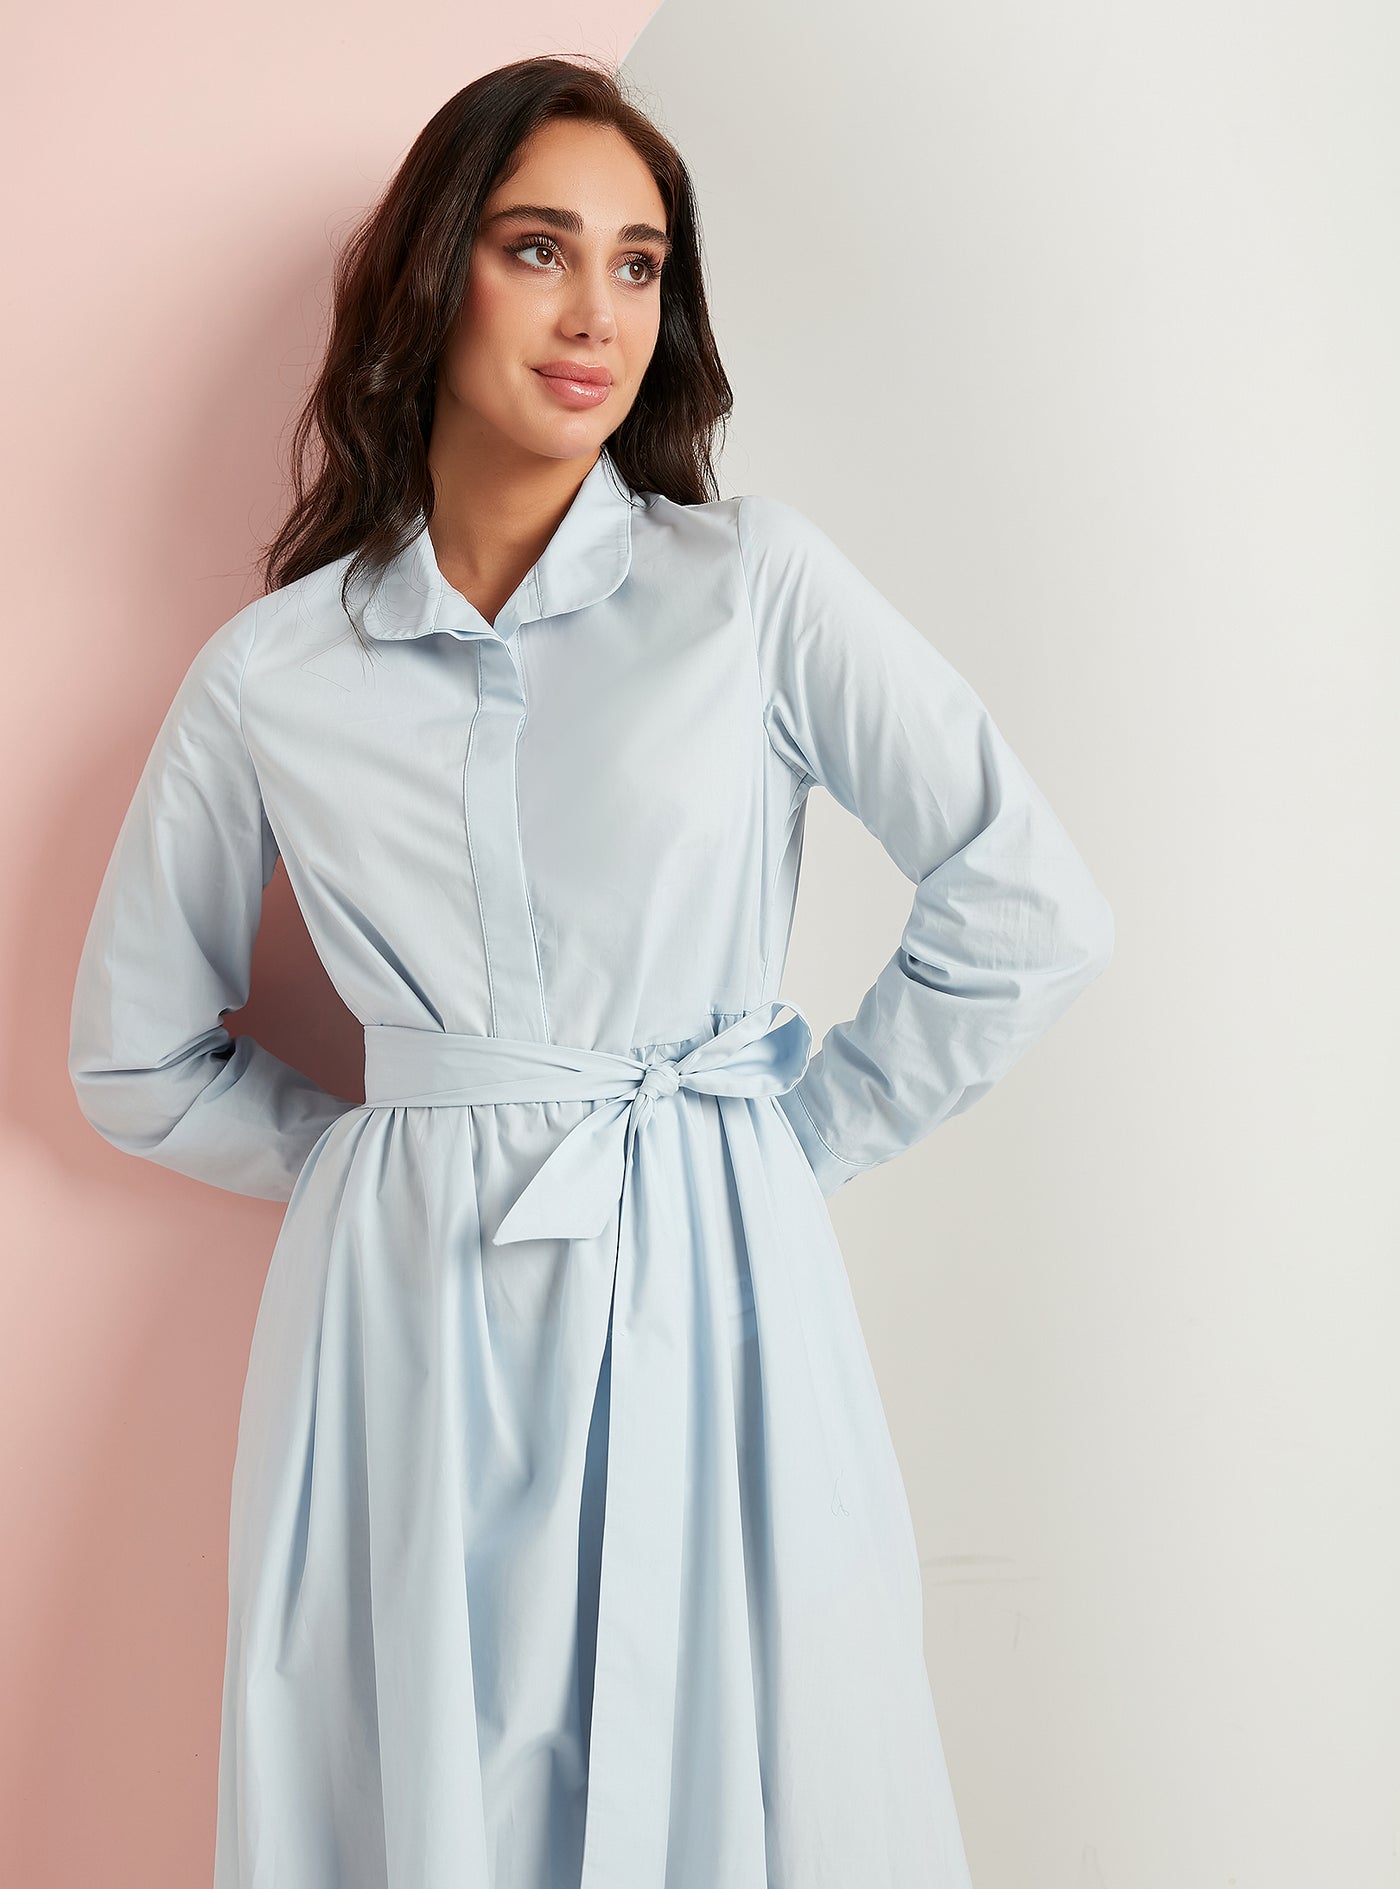 Cotton Blue Belted Maxi Dress With Pocket